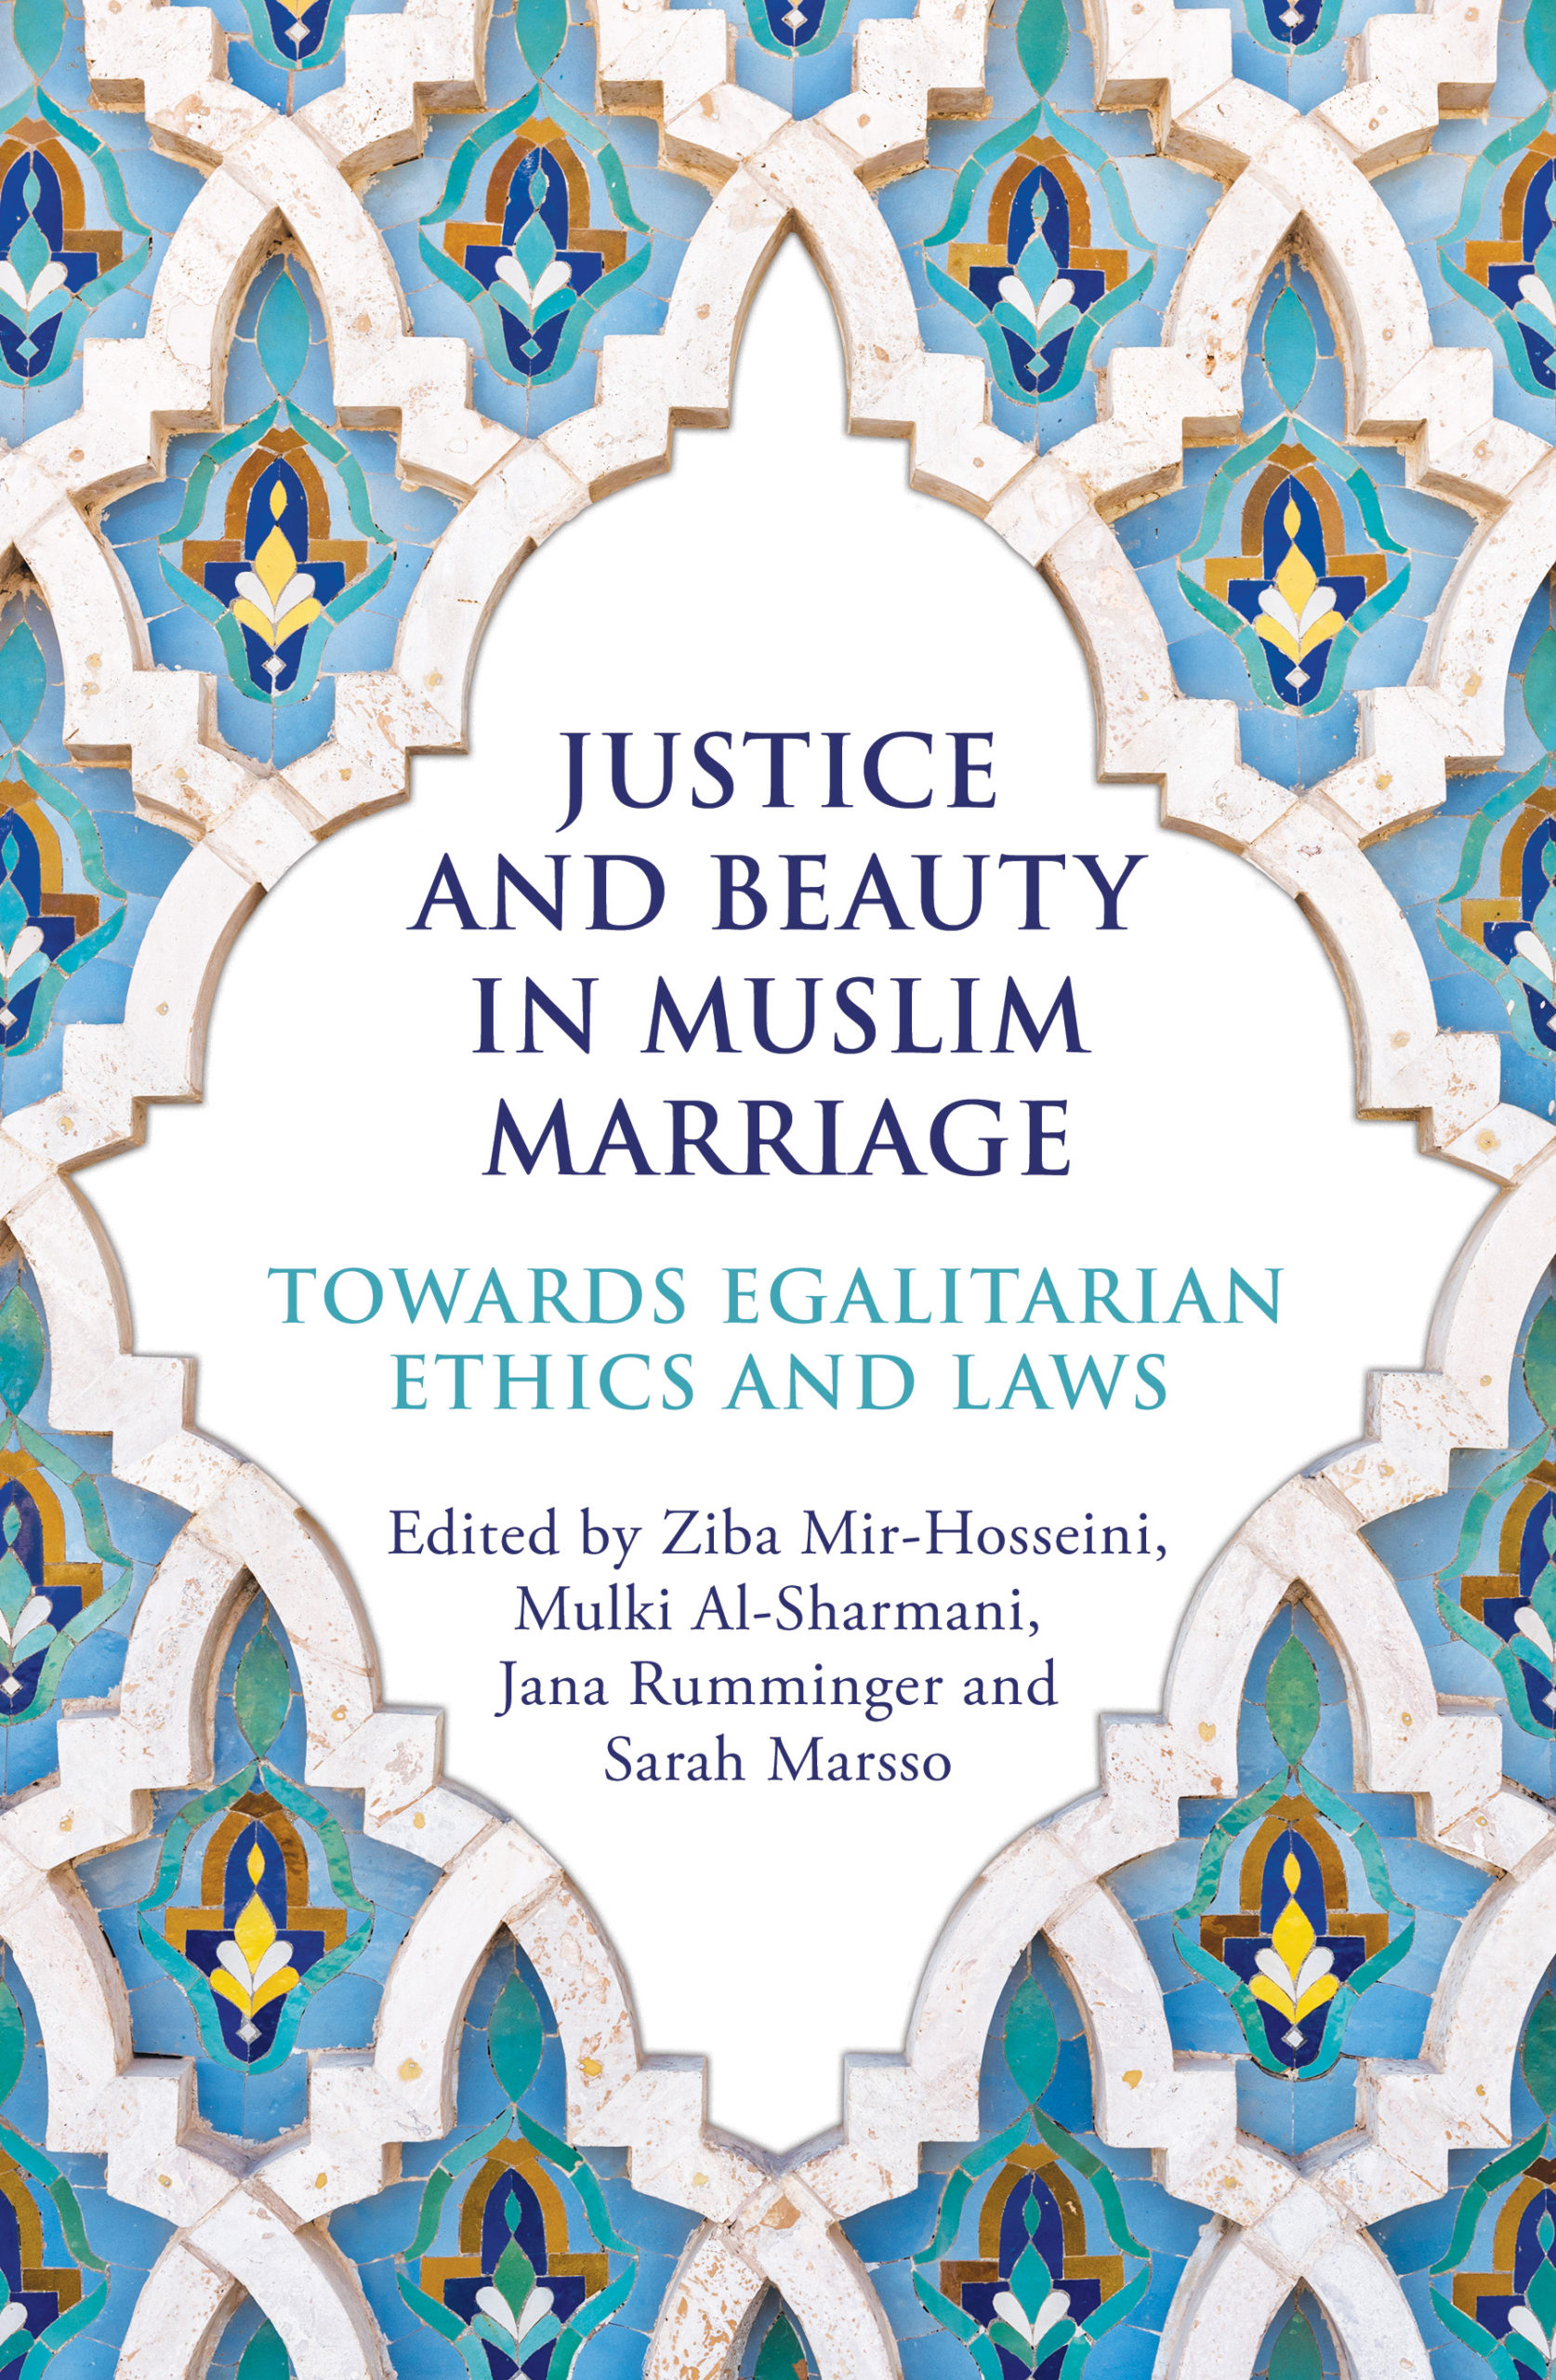 Justice And Beauty In Muslim Marriage book cover